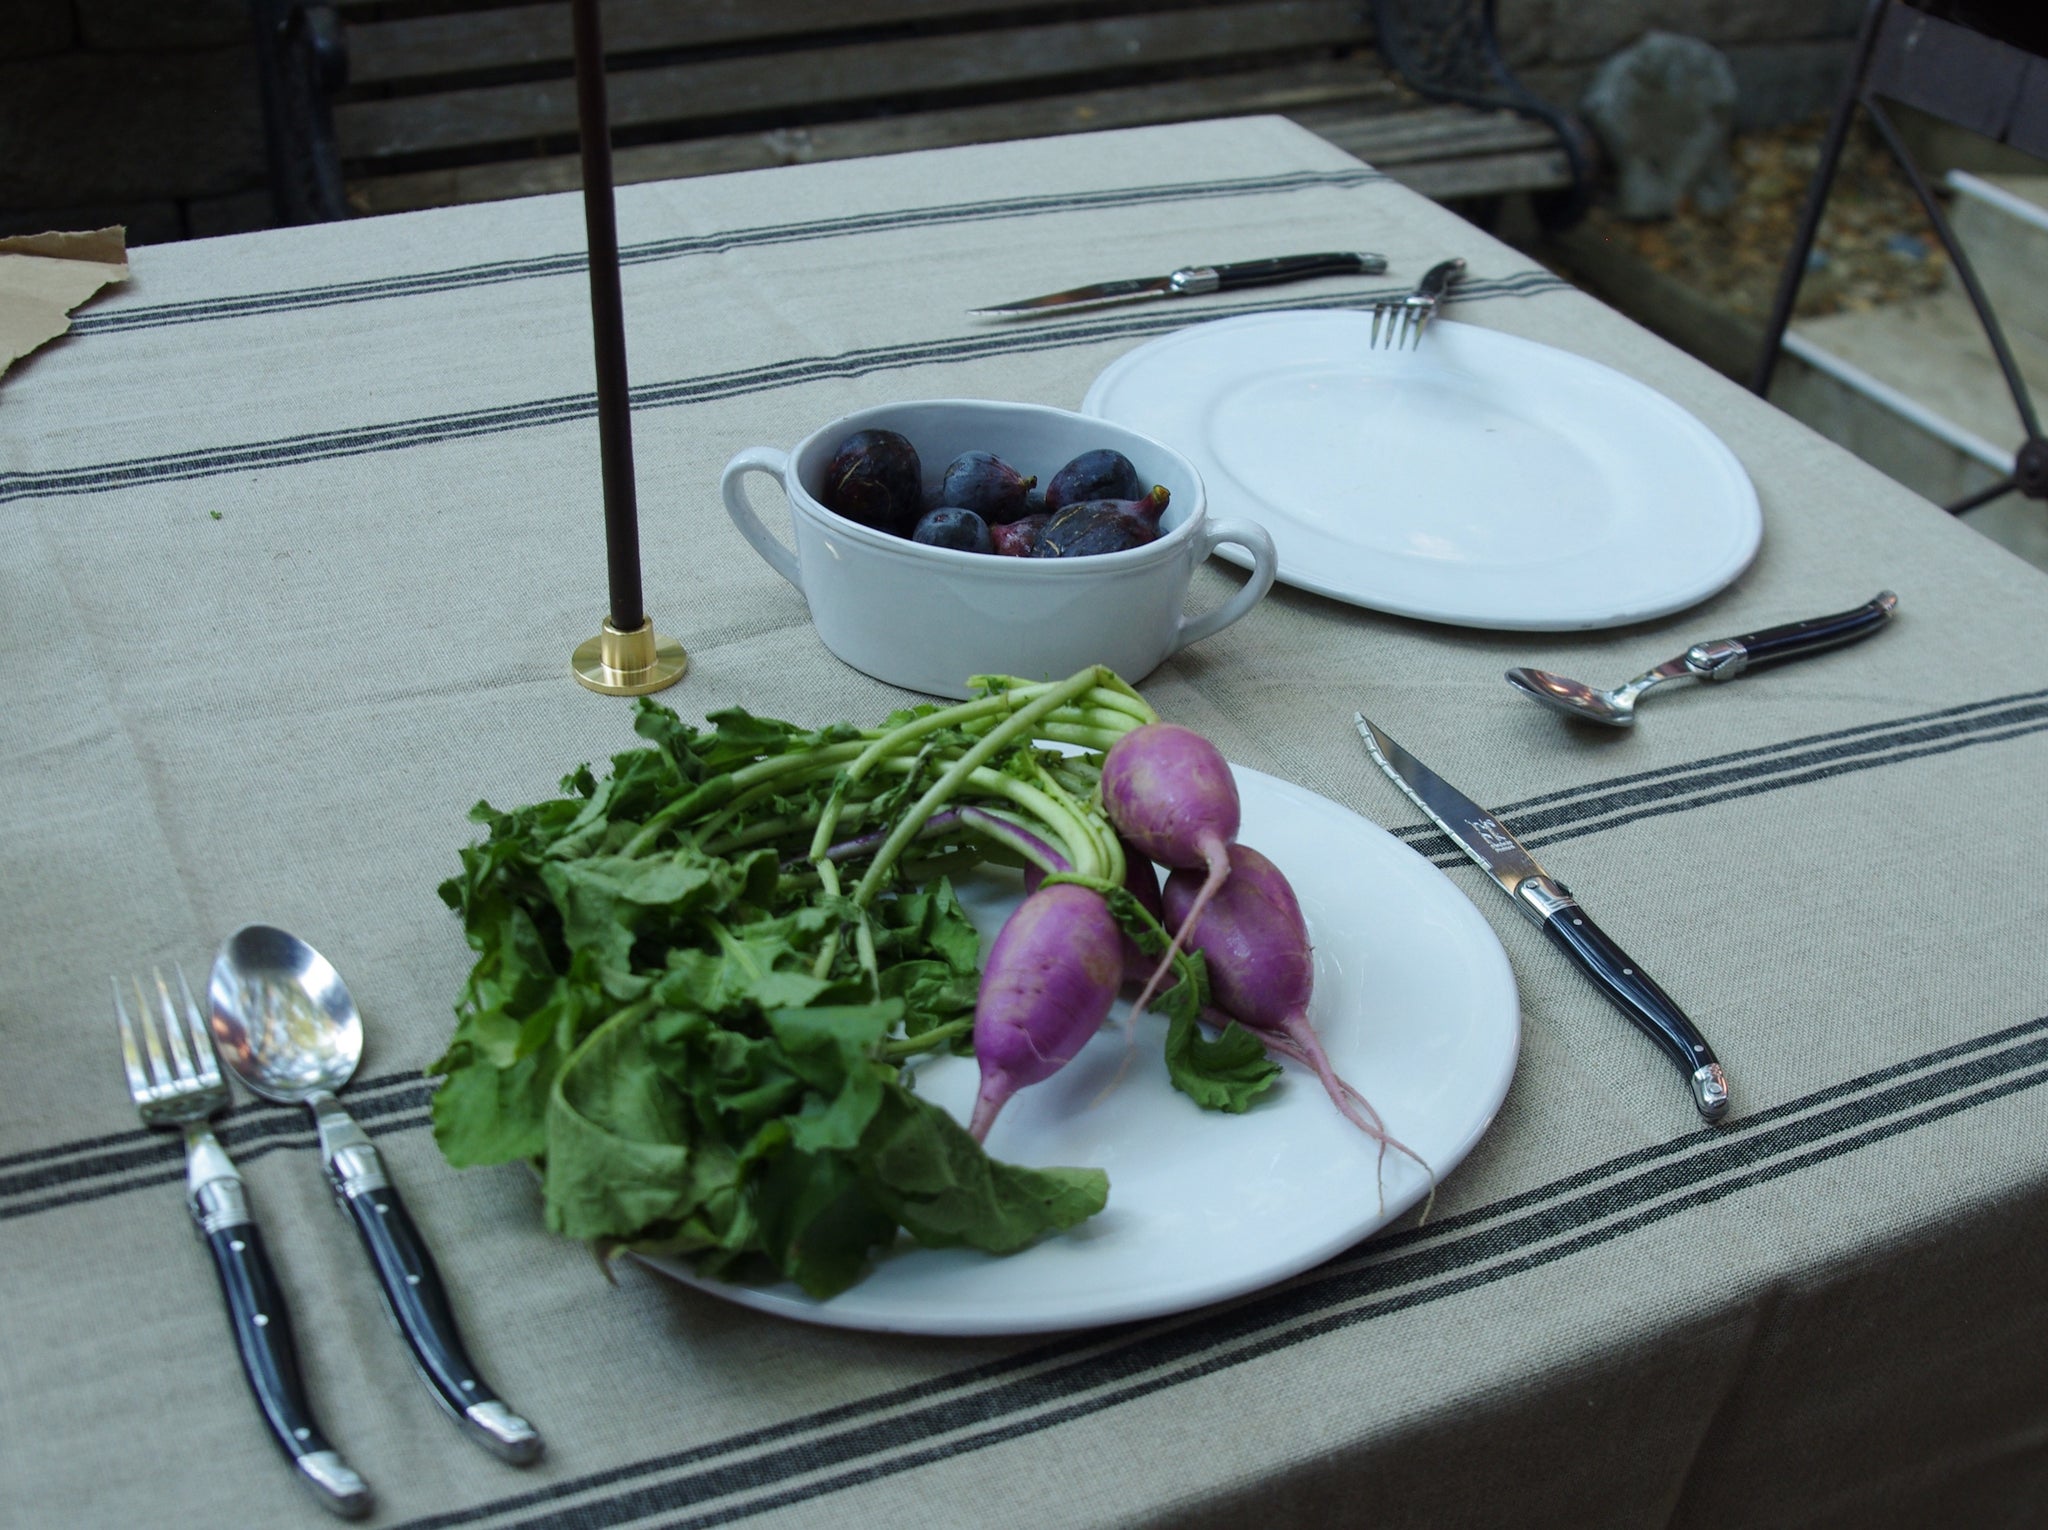 Outdoor table seting featuring white ceramic dinner plates and black cutlery.